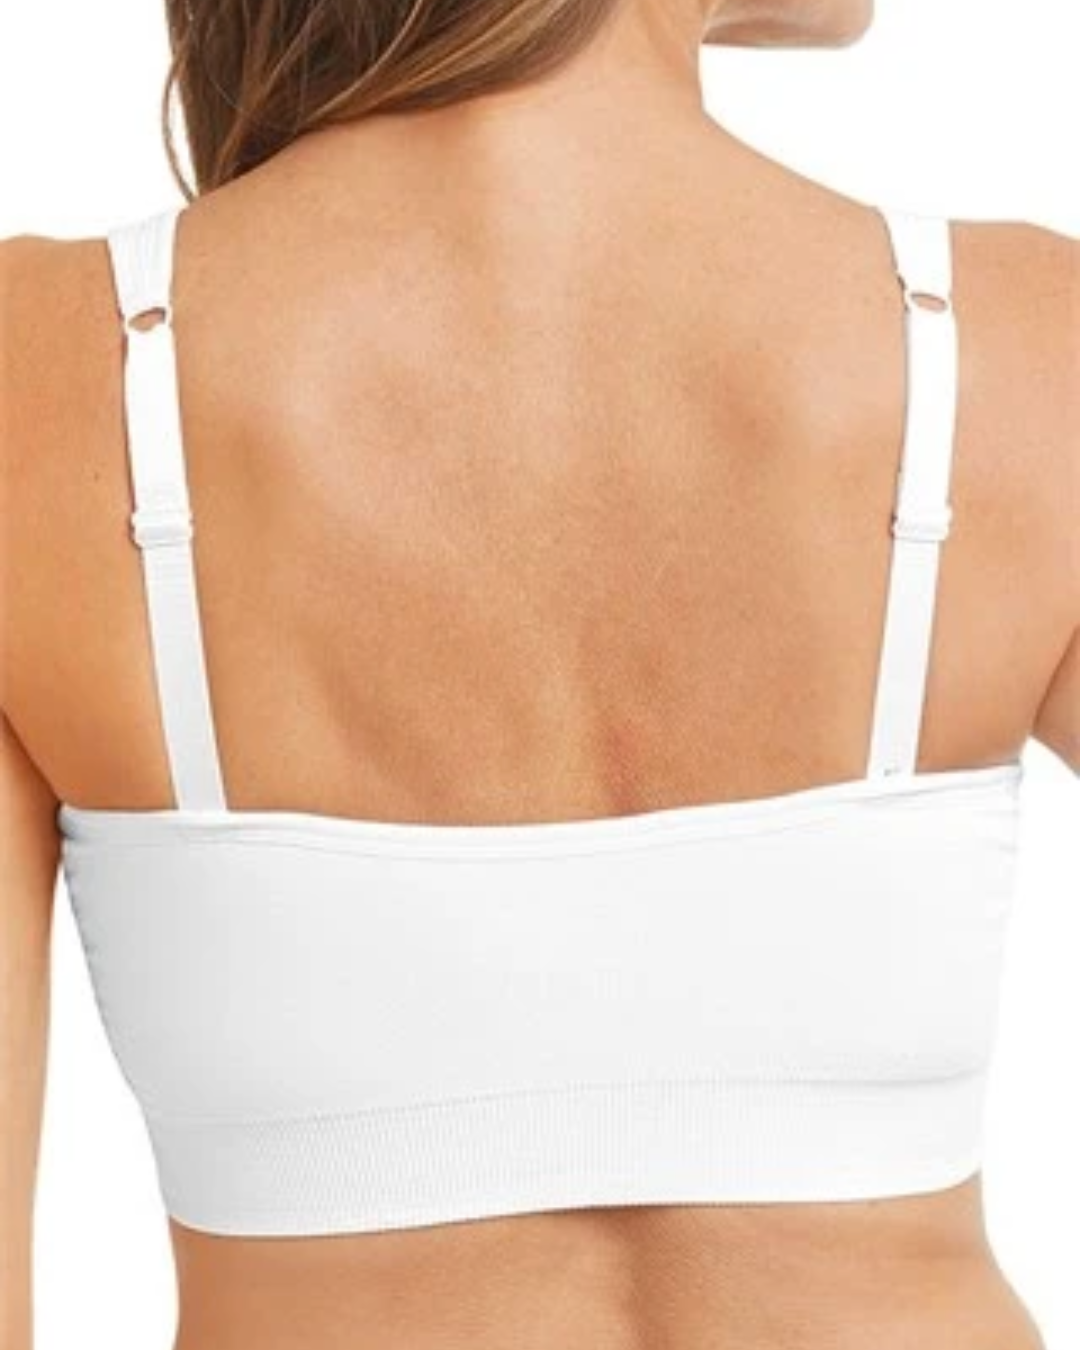 Image showcasing an adjustable strap garment with bilateral pockets, front zip closure, and integrated mesh panels. This garment provides comfort and support during the transitional period before regular underwear. It is suitable for breast surgeries like reconstruction, reduction, augmentation, and mastectomy. The garment also features a hook and loop fastener flap for compression belt attachment. Experience gentle support with our low-pressure level garment